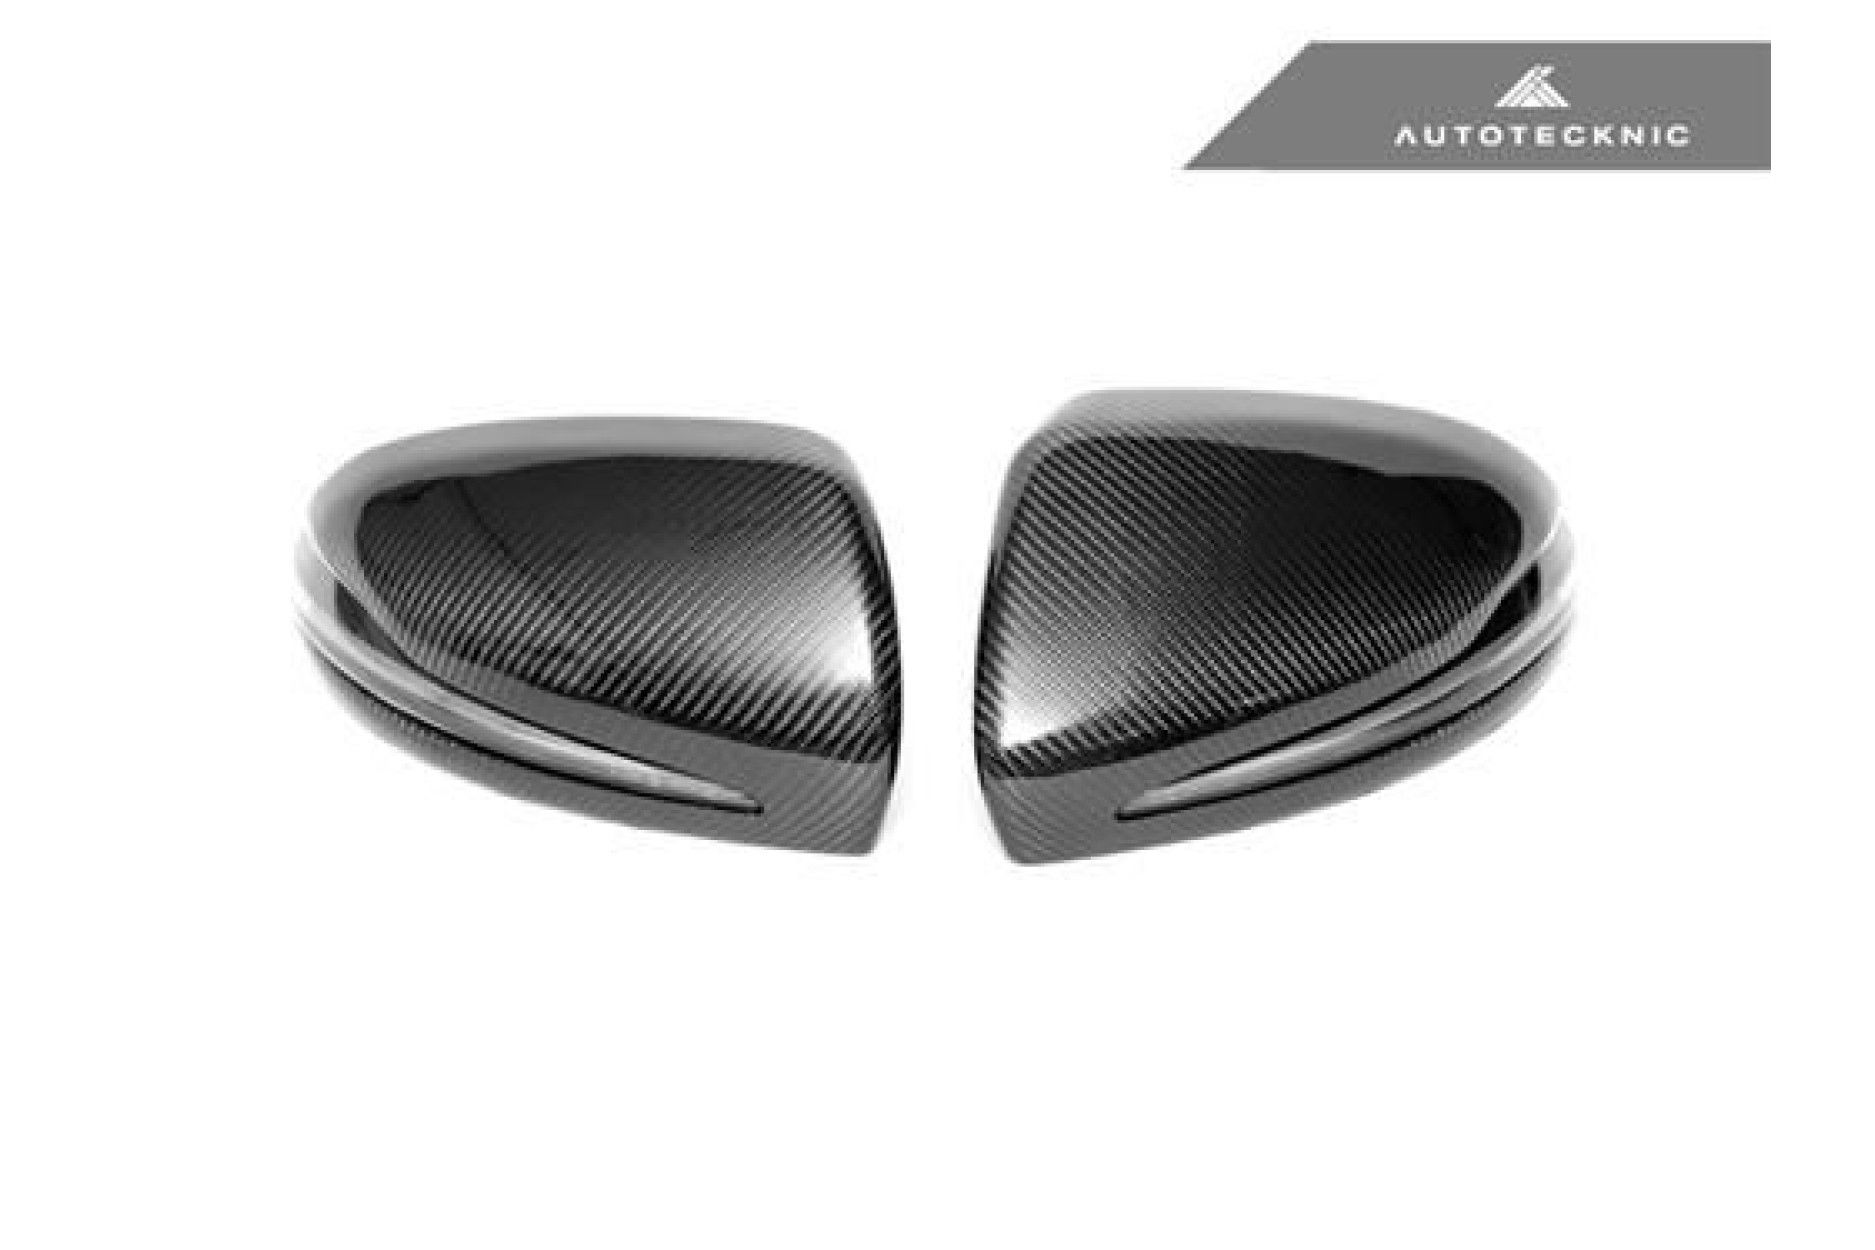 AutoTecknic Replacement Carbon Fiber Mirror Covers - Mercedes-Benz W205 /W222 (4) 